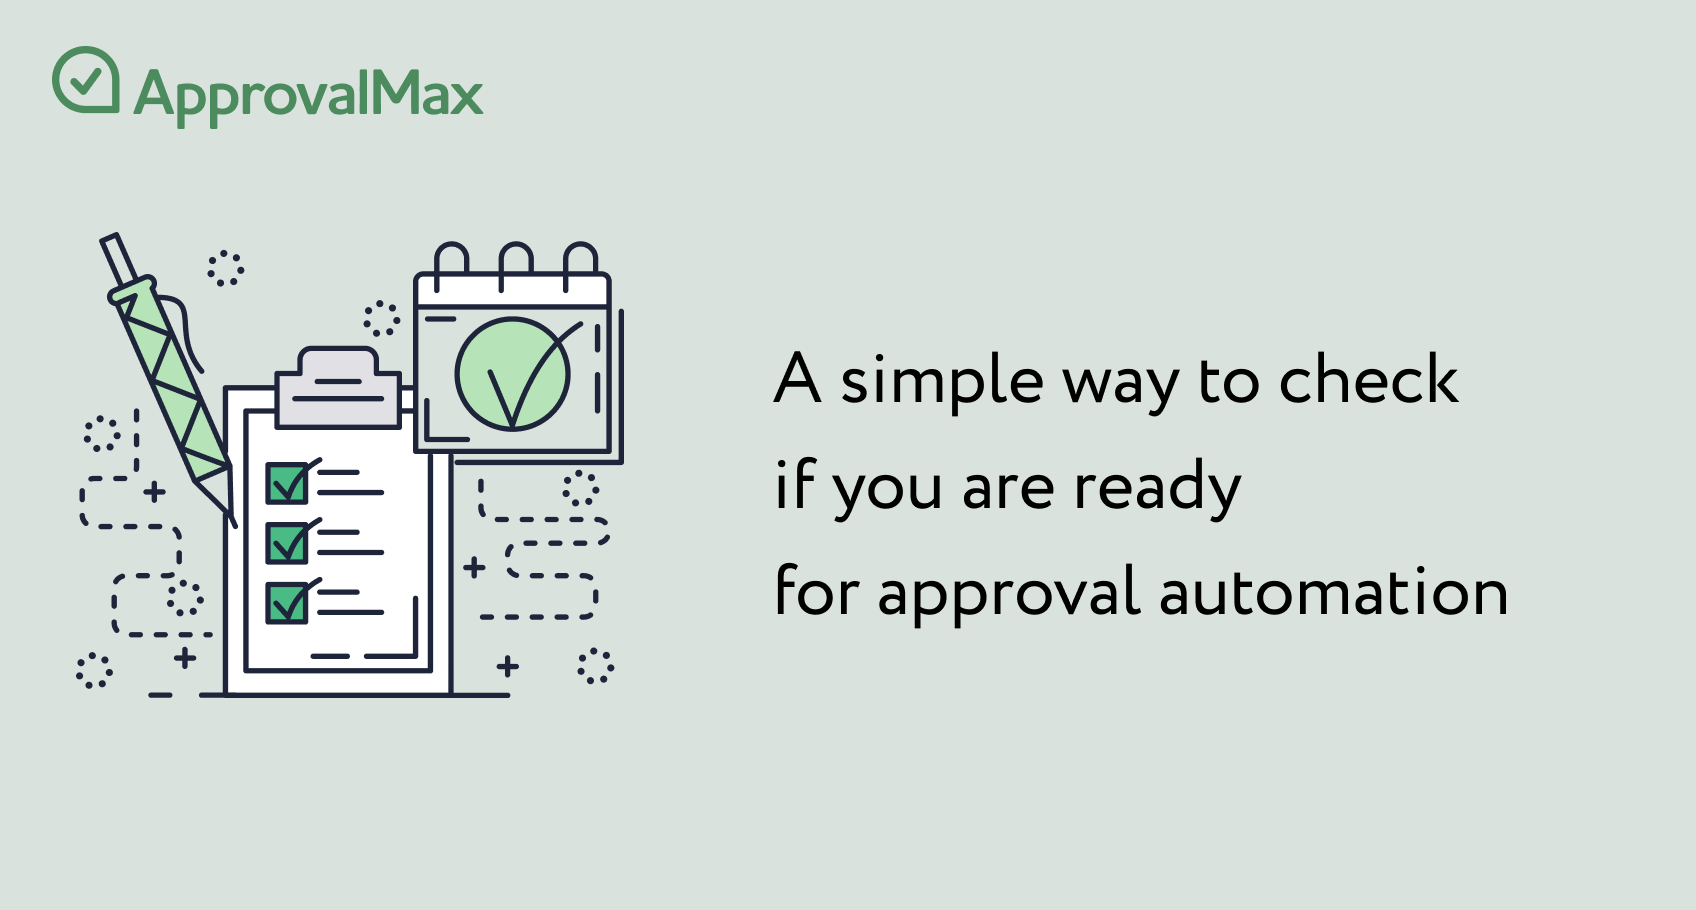 Checklist: It’s high time for approval automation if…